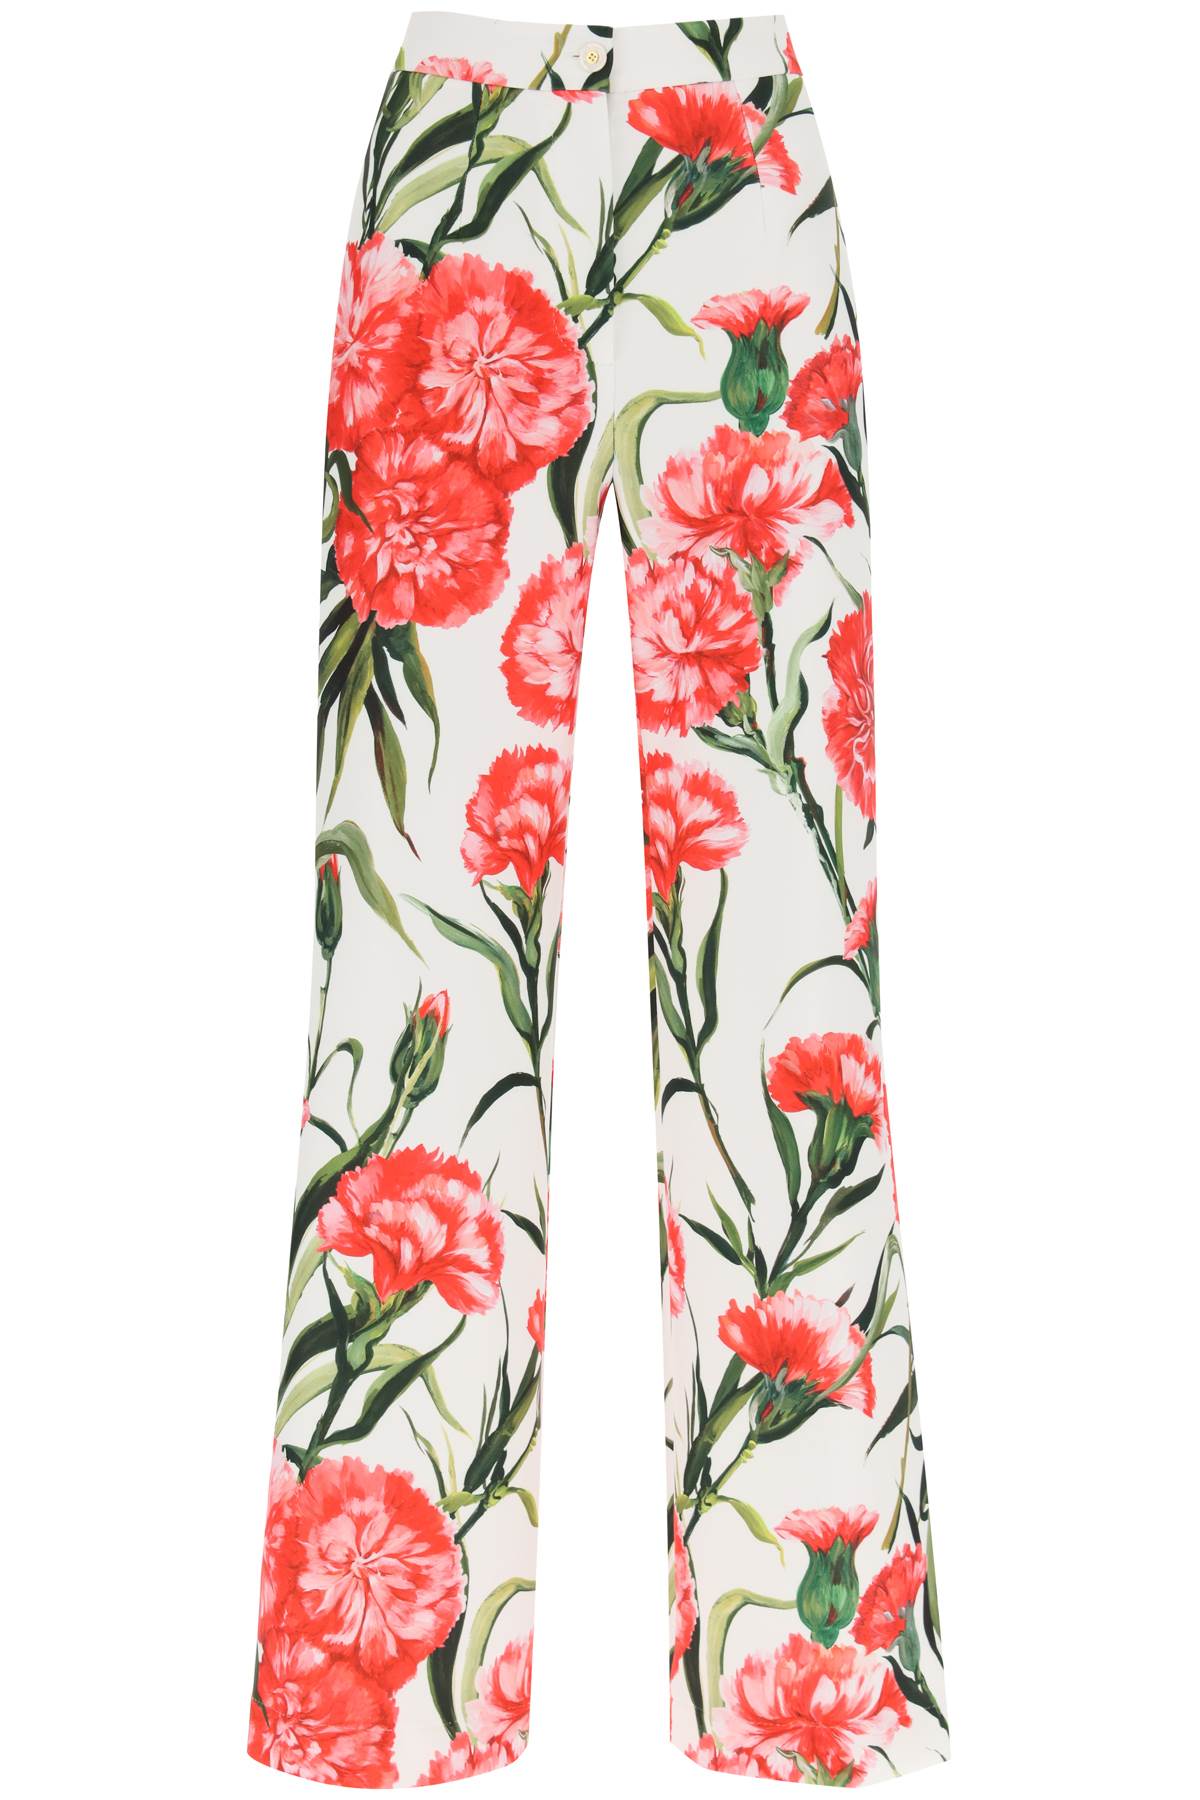 DOLCE & GABBANA WIDE-LEG JERSEY trousers WITH CARNATION PRINT